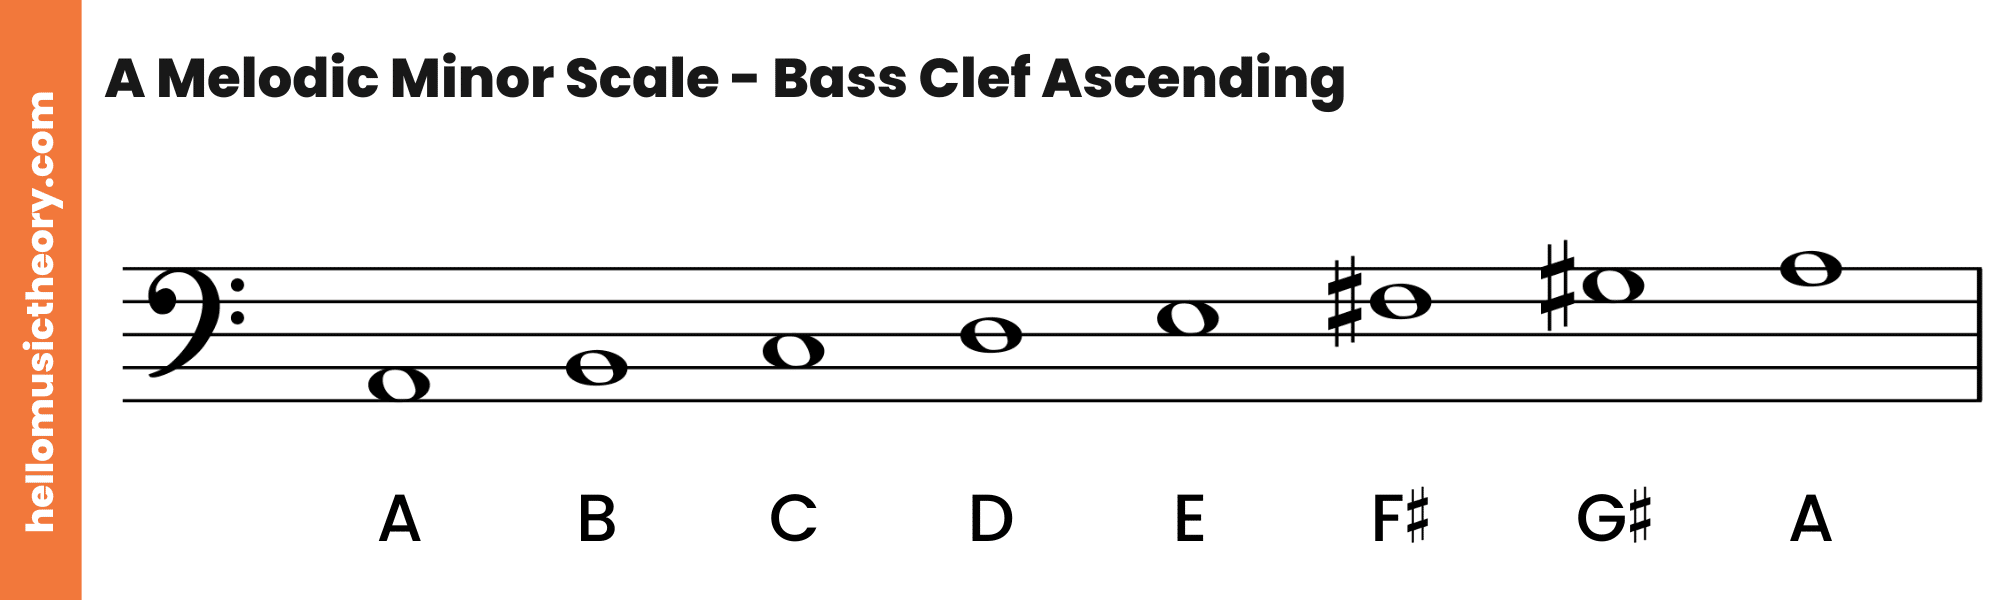 A Melodic Minor Scale Bass Clef Ascending